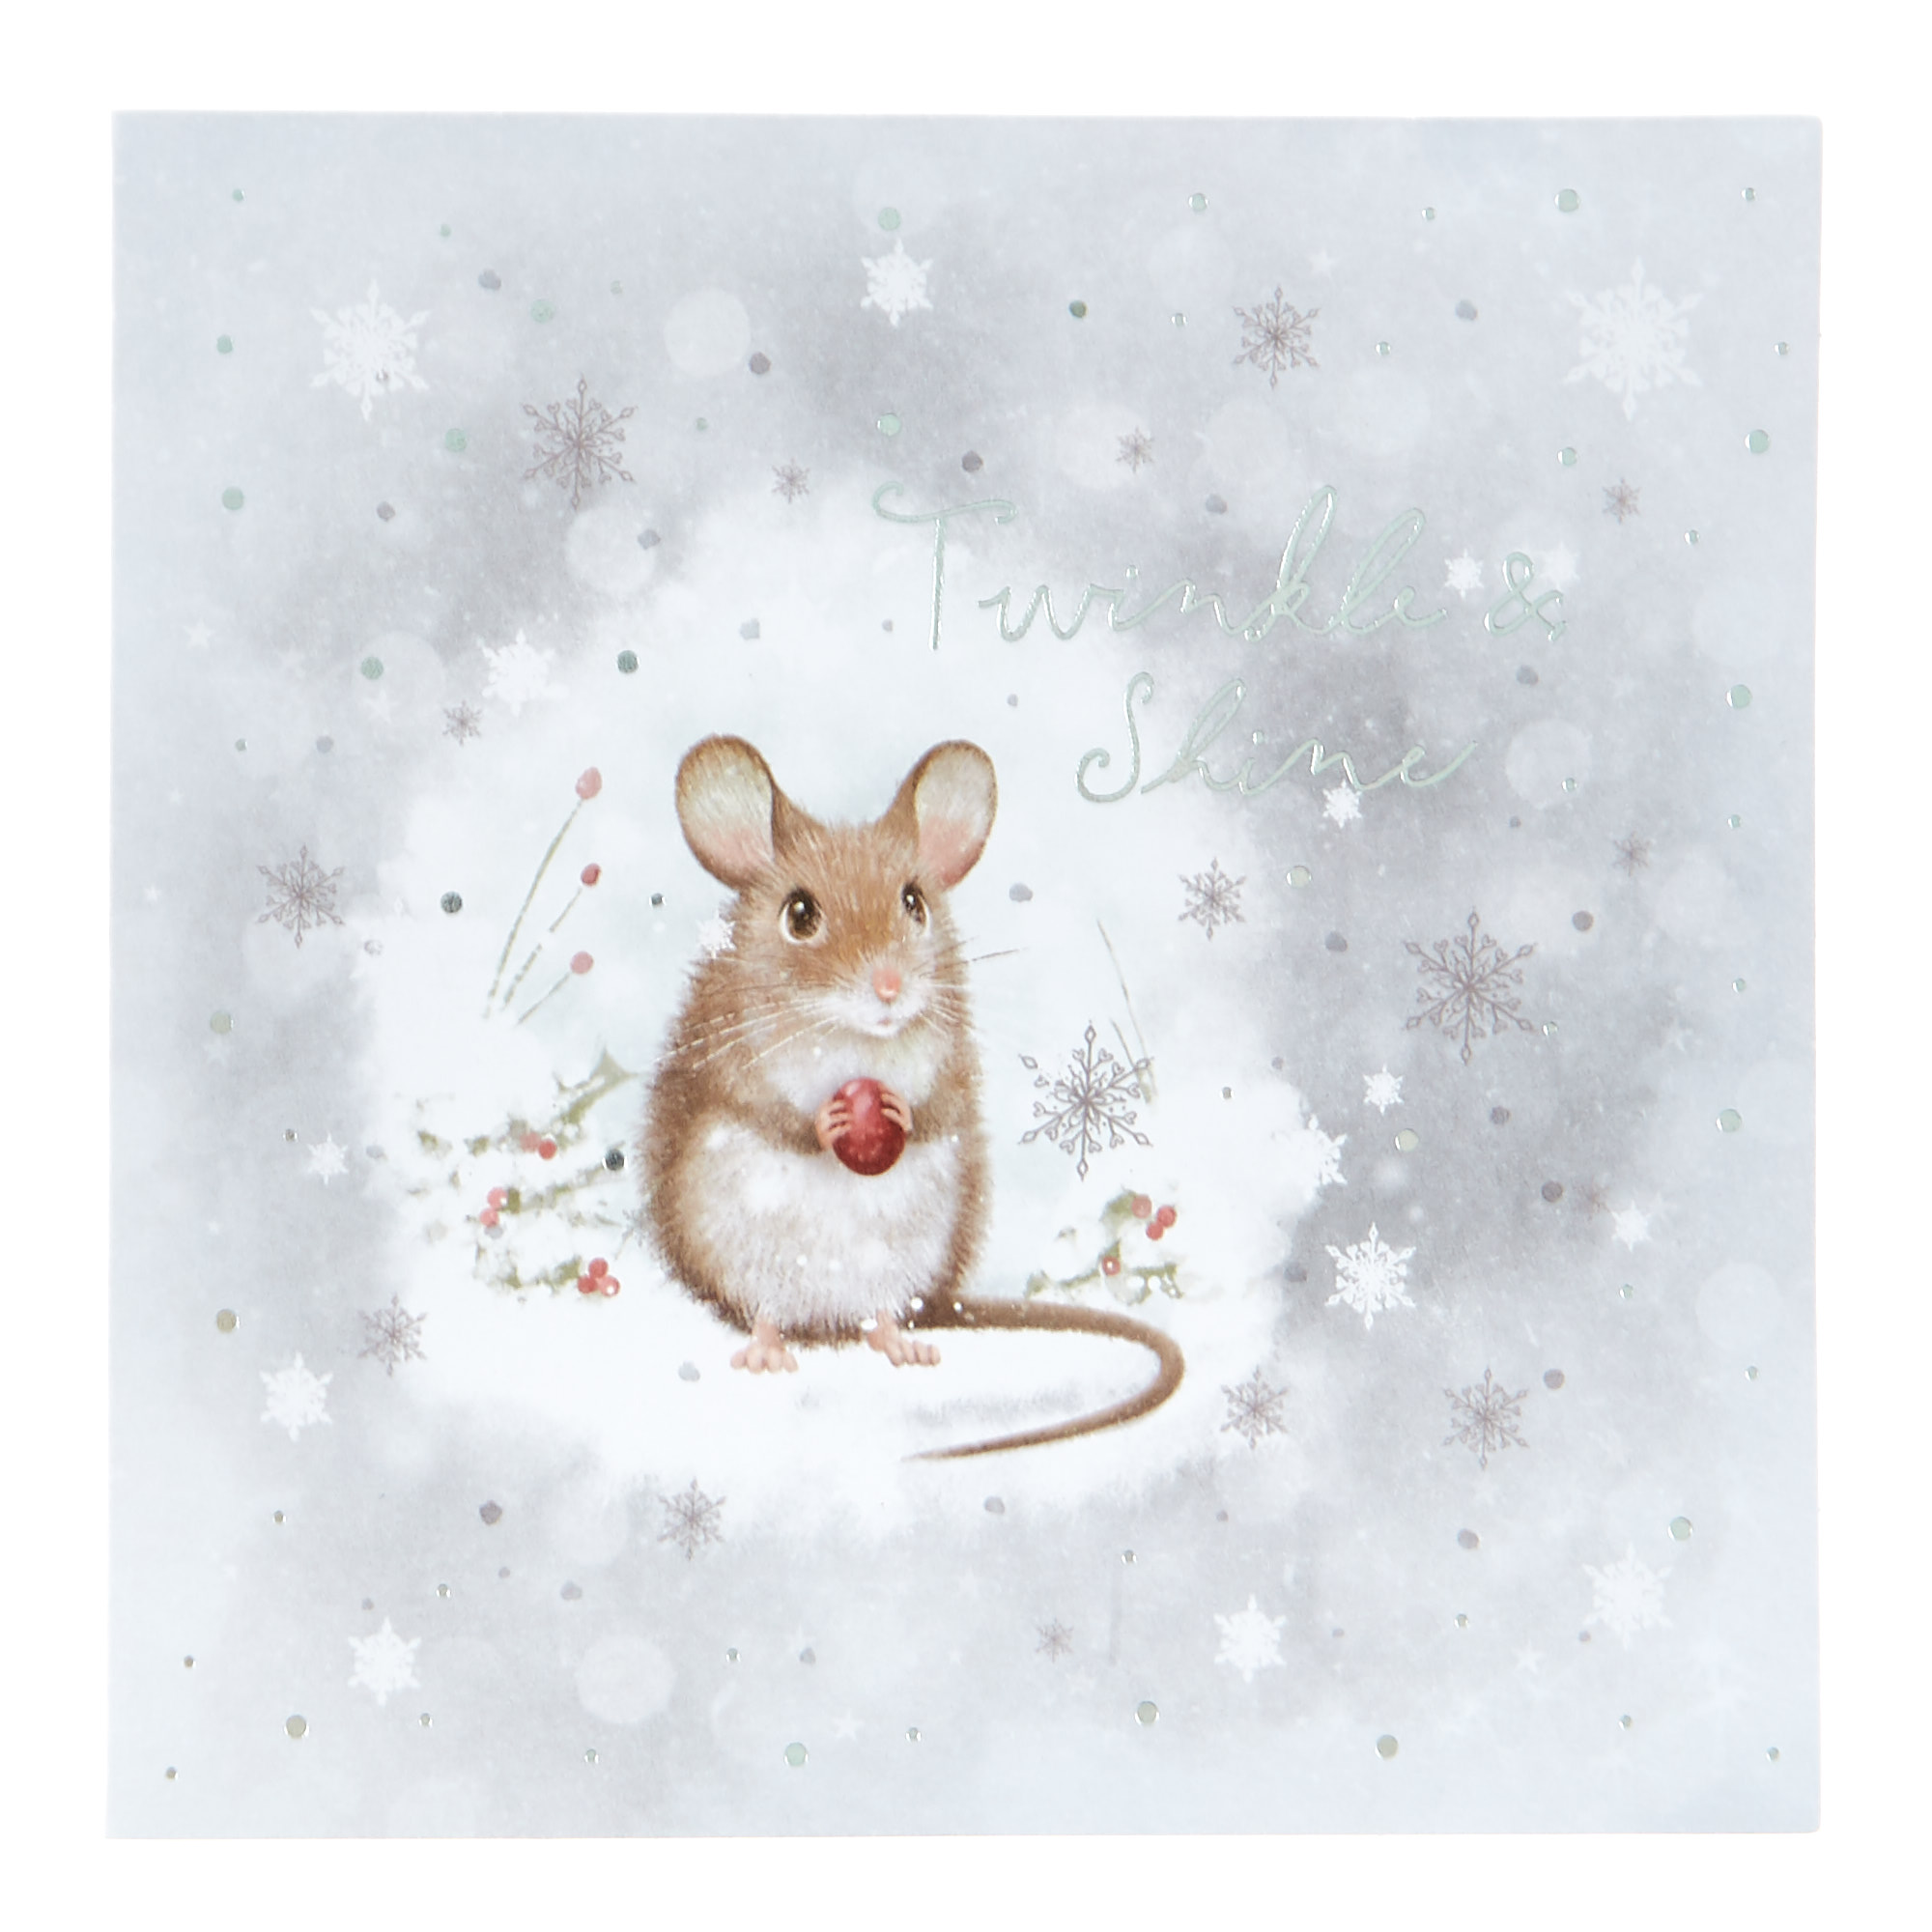 20 Charity Christmas Cards - Enchanted Forest (4 Designs)